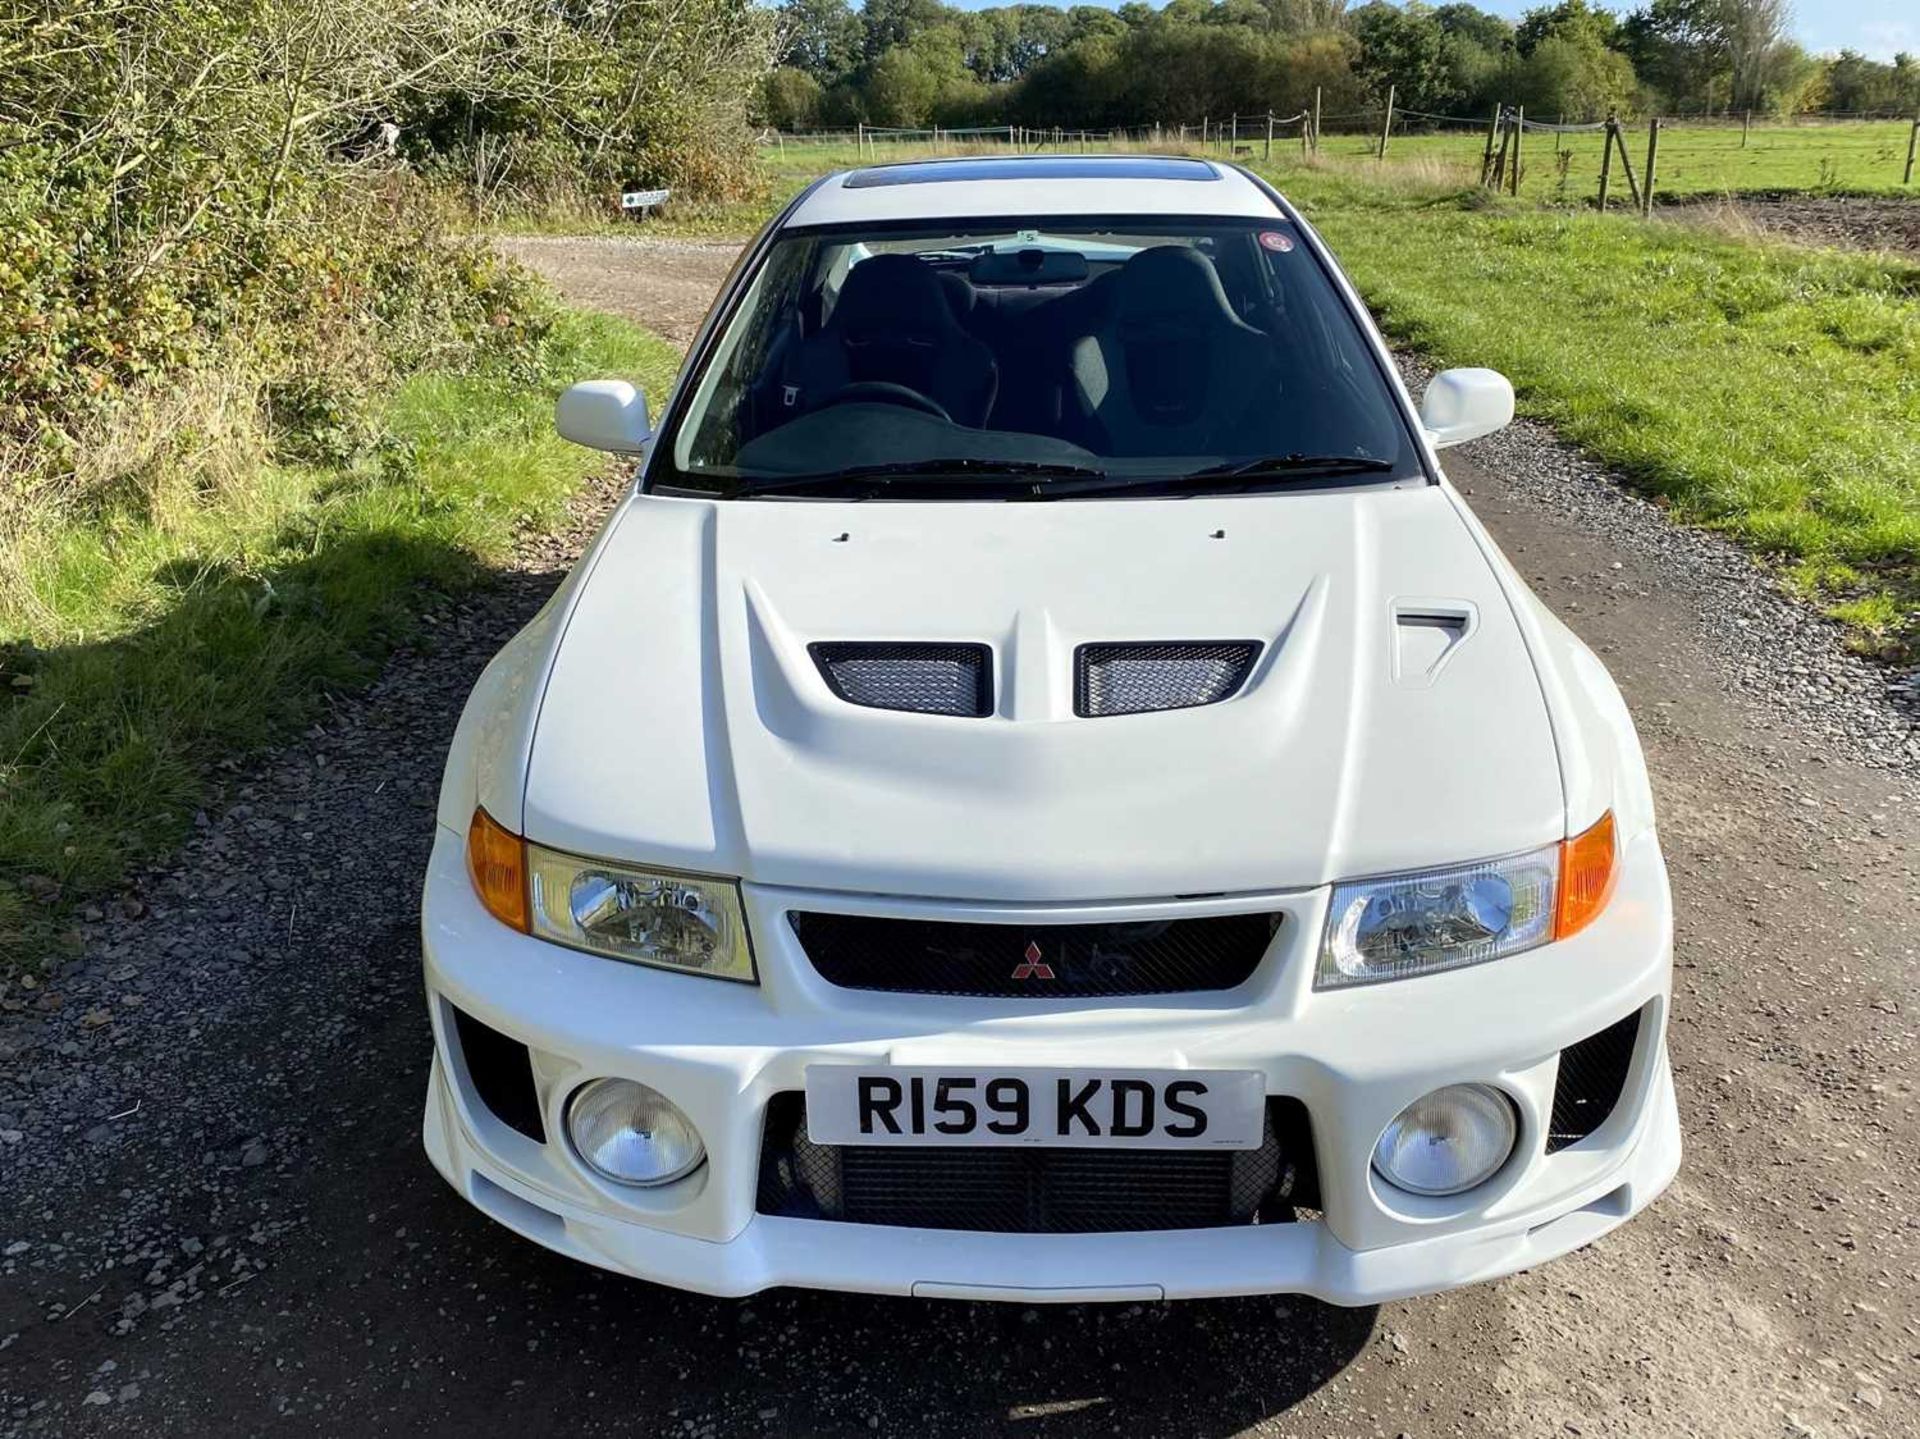 1998 Mitsubishi Lancer Evolution V GSR One UK keeper since being imported two years ago - Image 12 of 100